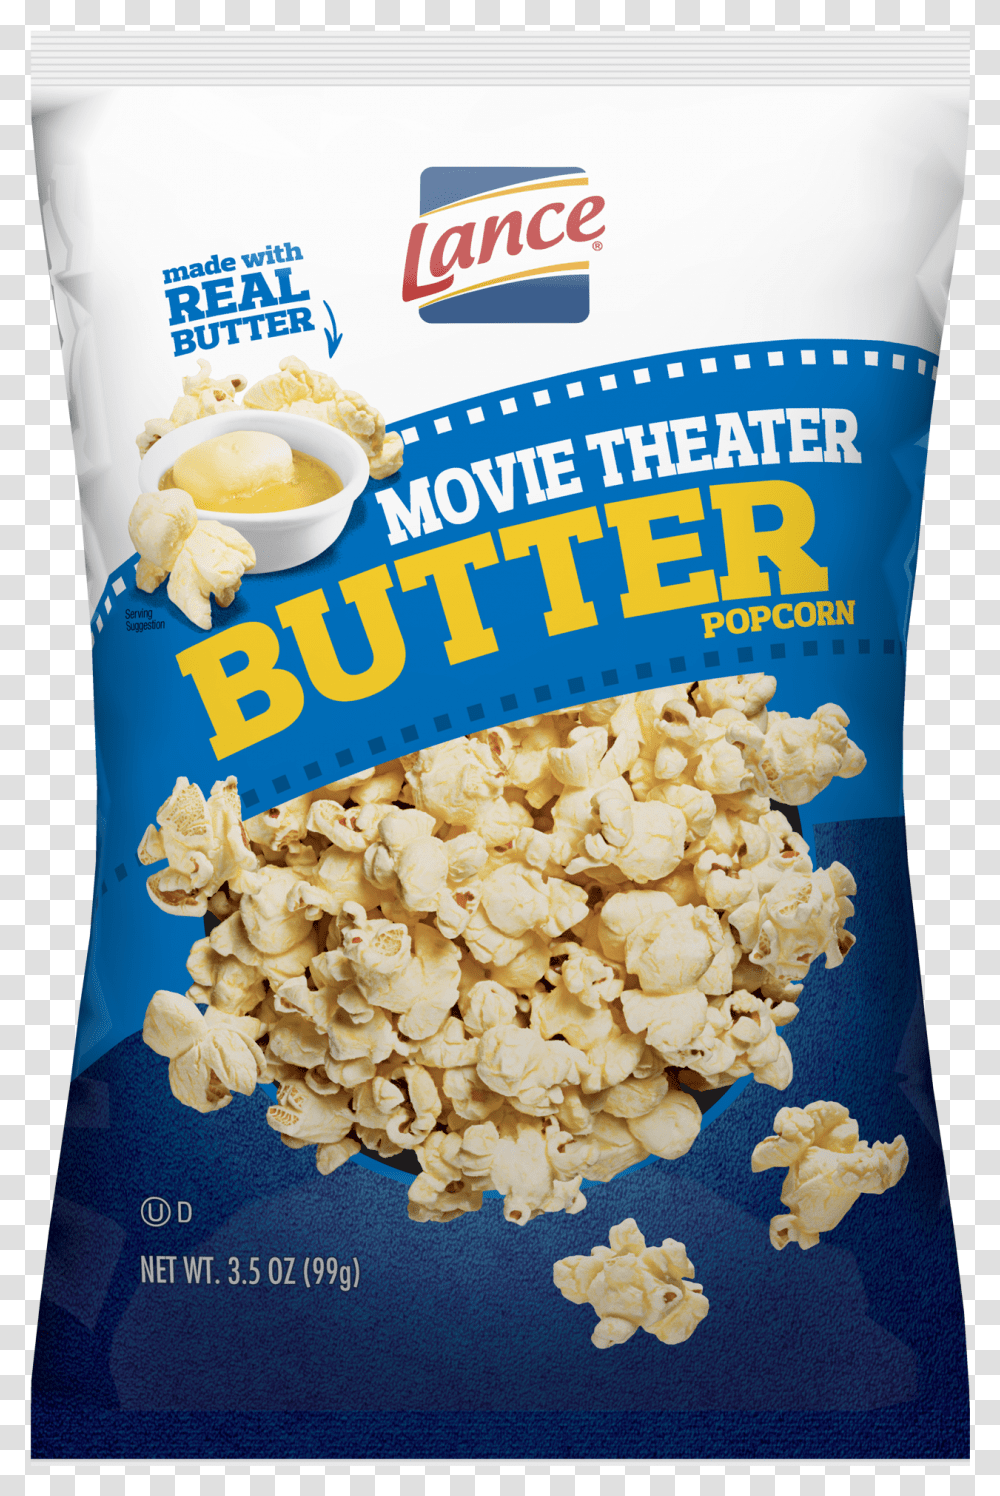 Lance Popcorn Movie Theater Butter Lance Movie Butter Popcorn, Food Transparent Png